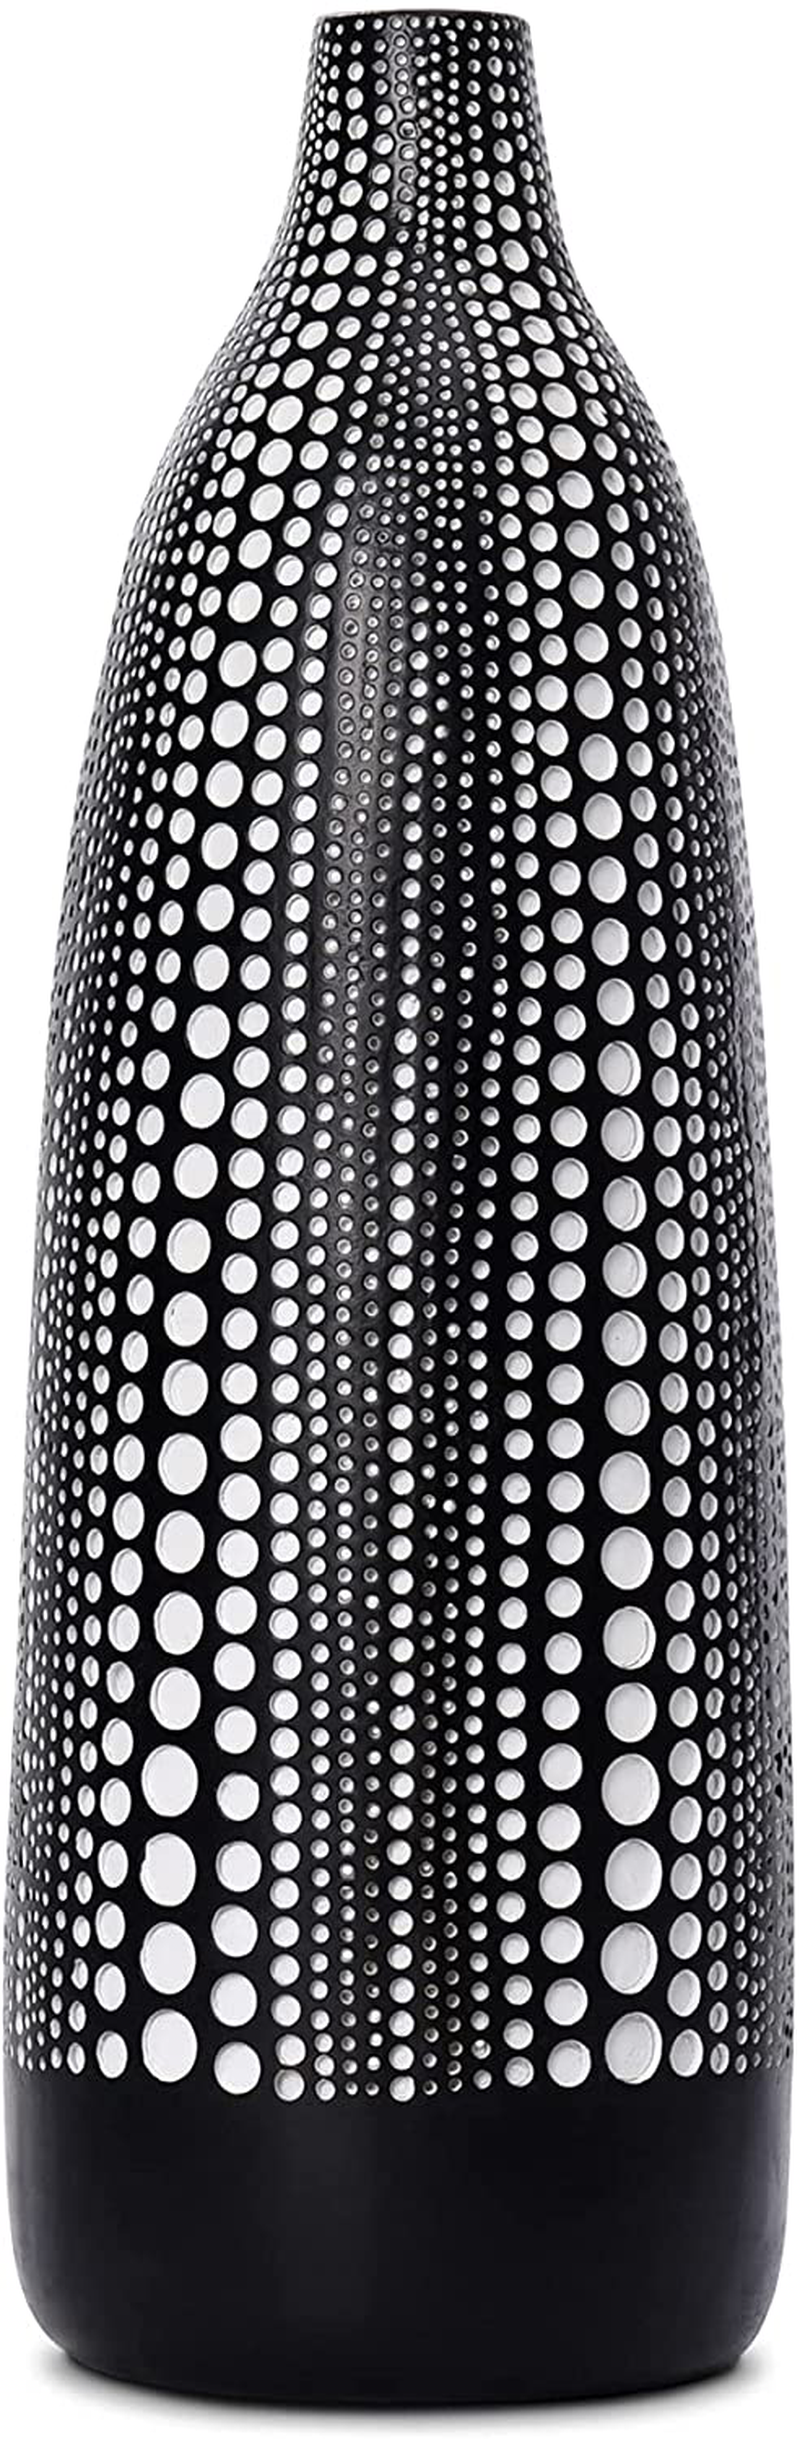 Quoowiit Flower Vase, Decorative Vases Floral Vase for Centerpieces, Vase for Home Decor, Living Room, Office Table or Wedding, Modern Resin Vases with Black and White Dots-White Tall Home & Garden > Decor > Vases Quoowiit Black-tall  